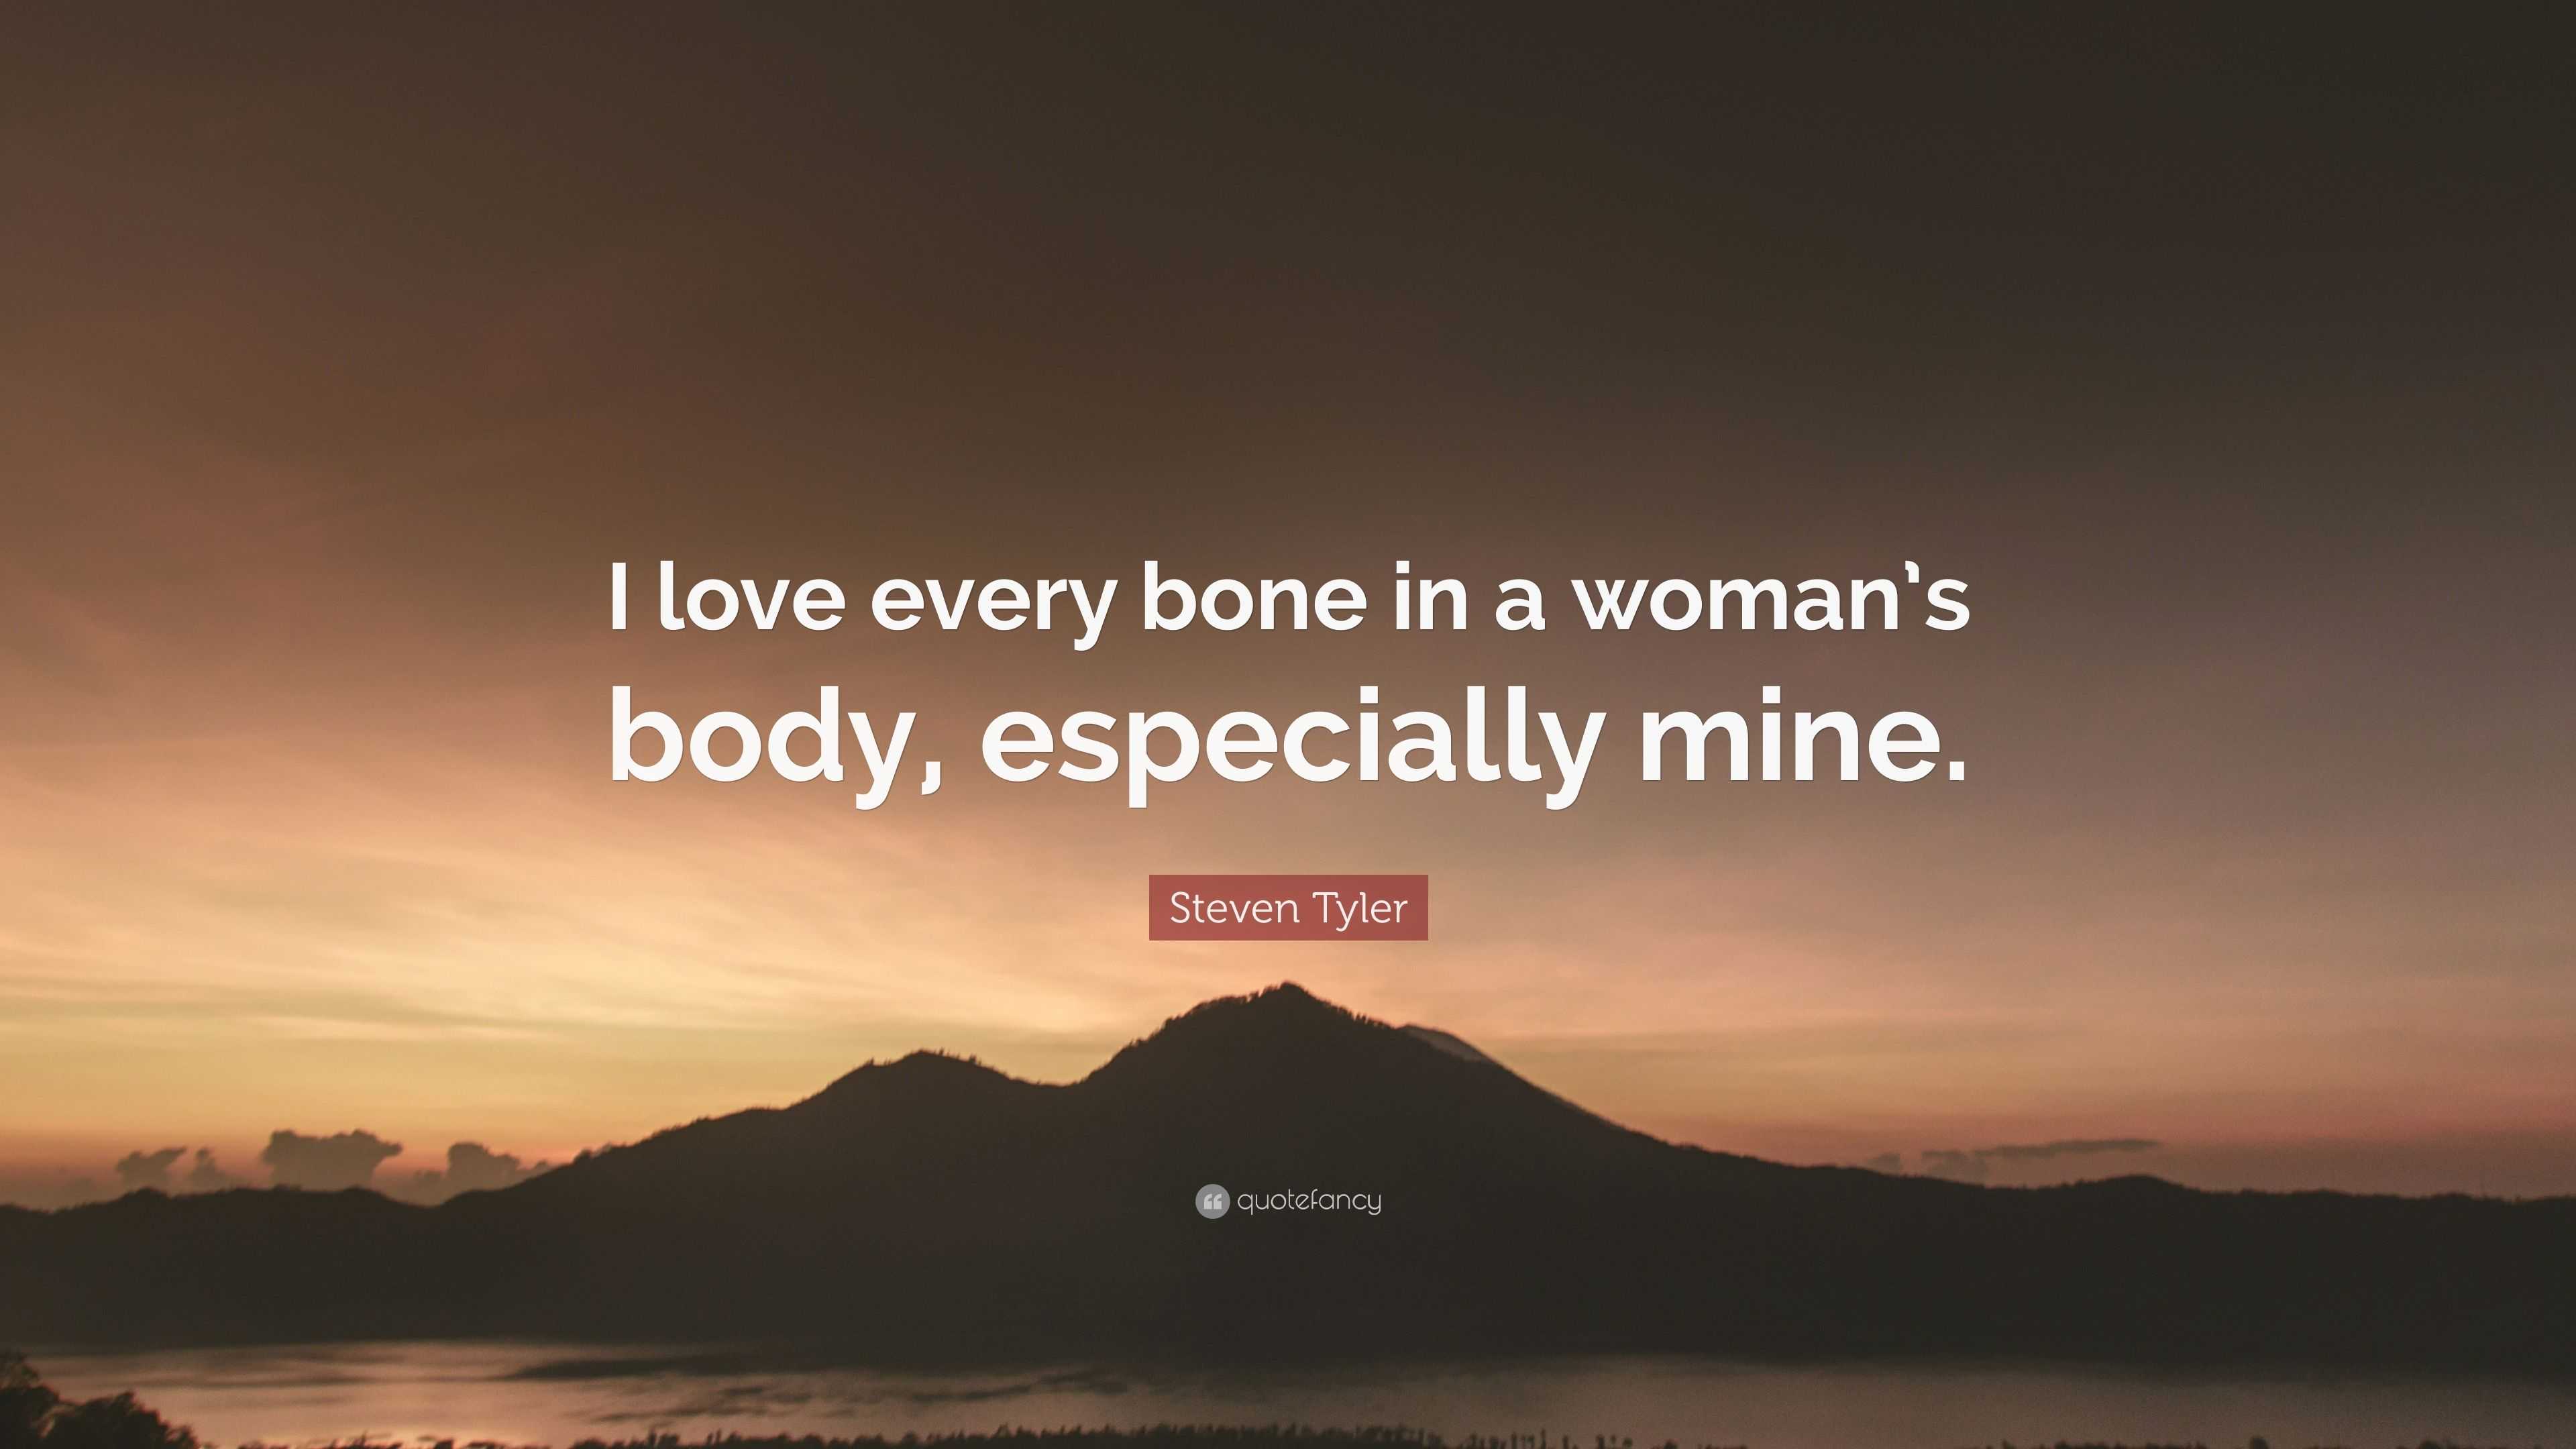 Steven Tyler Quote: “I love every bone in a woman's body, especially mine.”